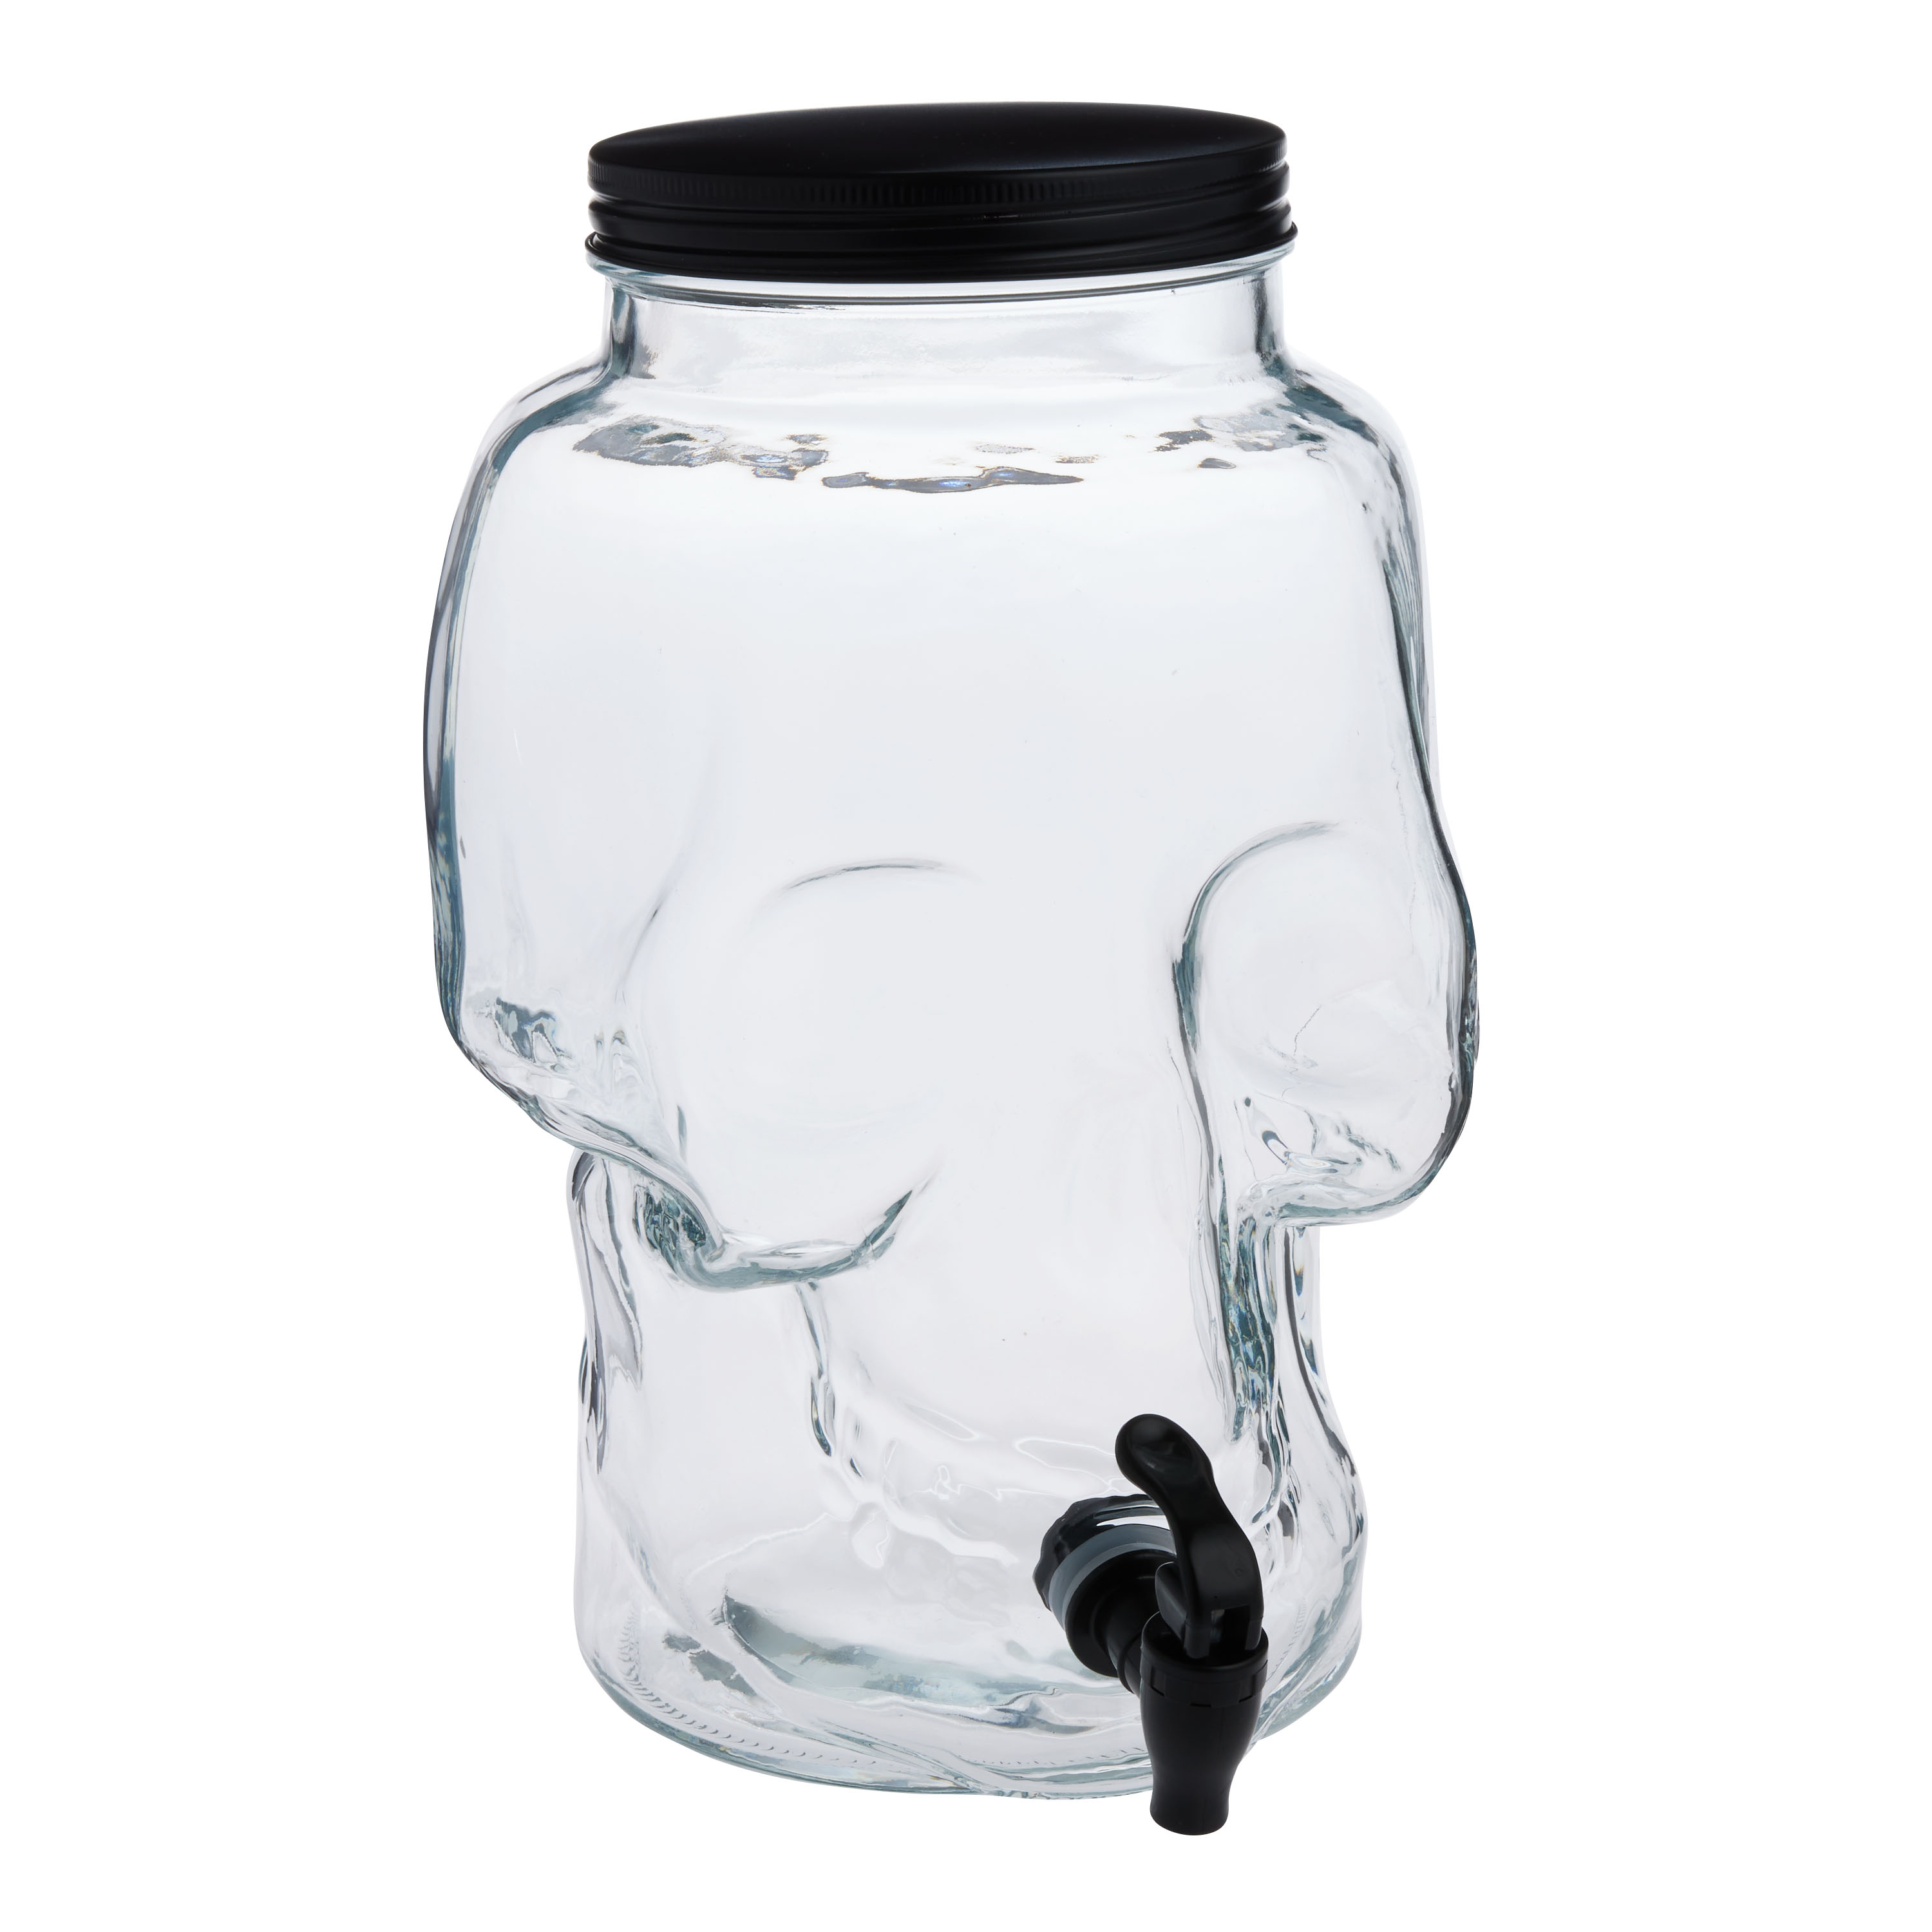 9 Drink Dispensers That Are Ready for Outdoor Parties  Mason jar drinks,  Mason jar drink dispenser, Glass mason jars